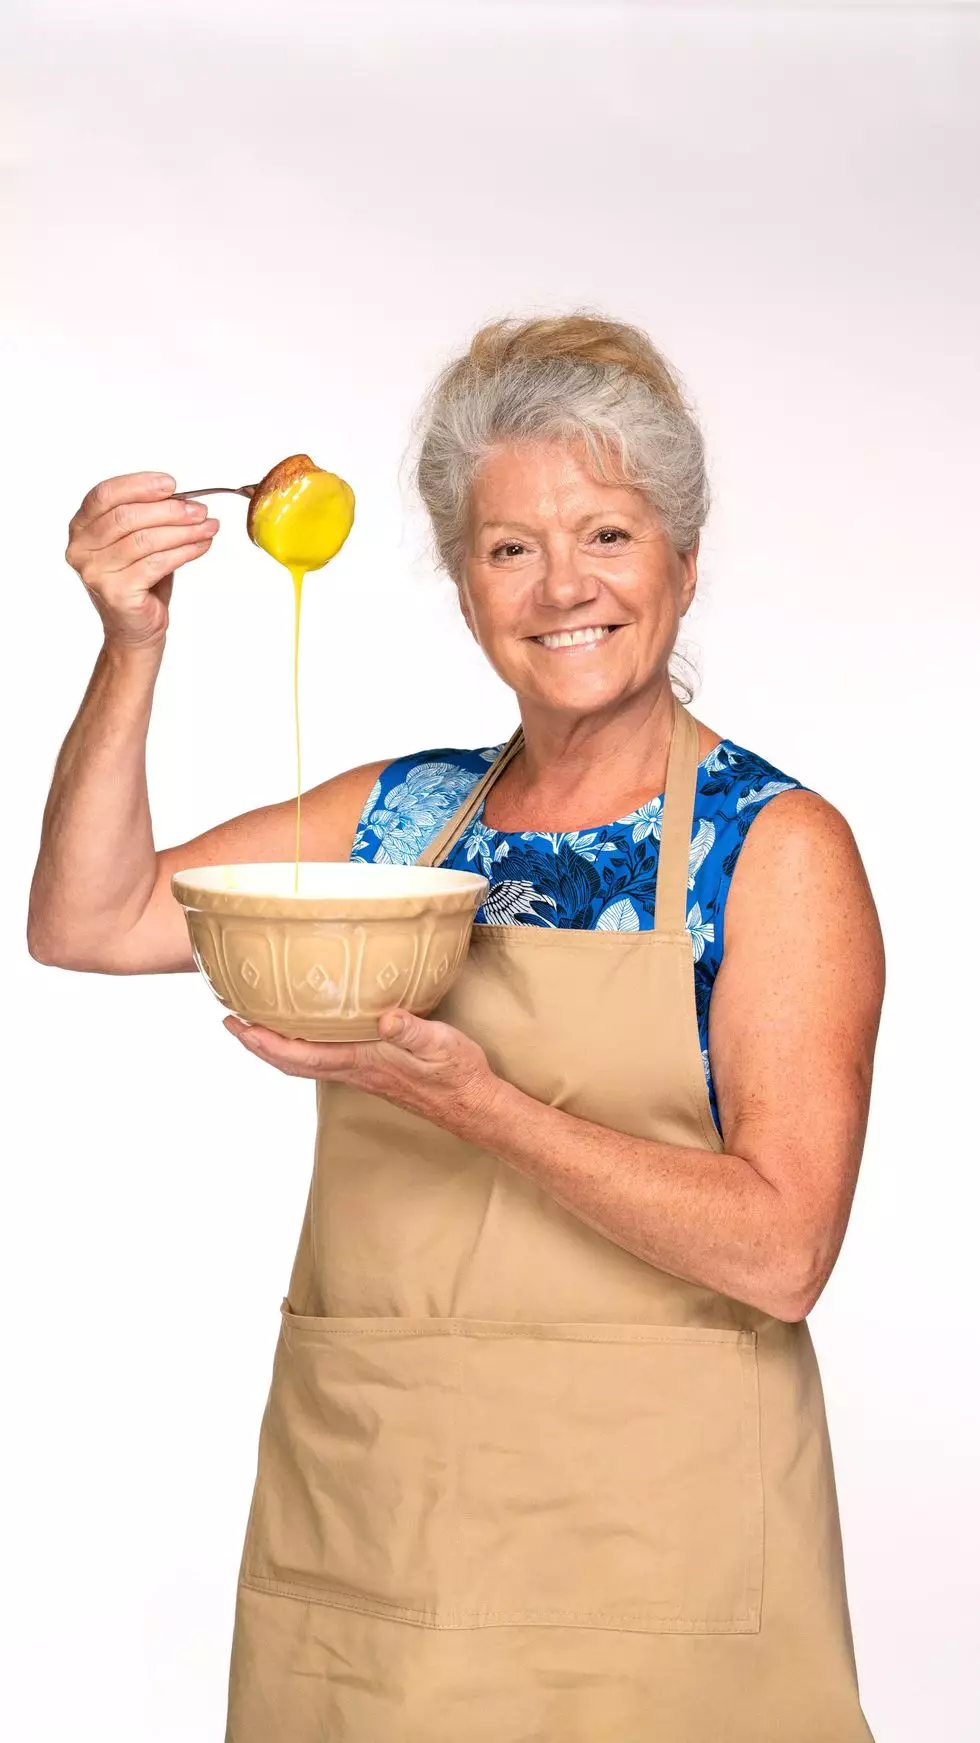 Baking has been Linda's hobby ever since she was little (